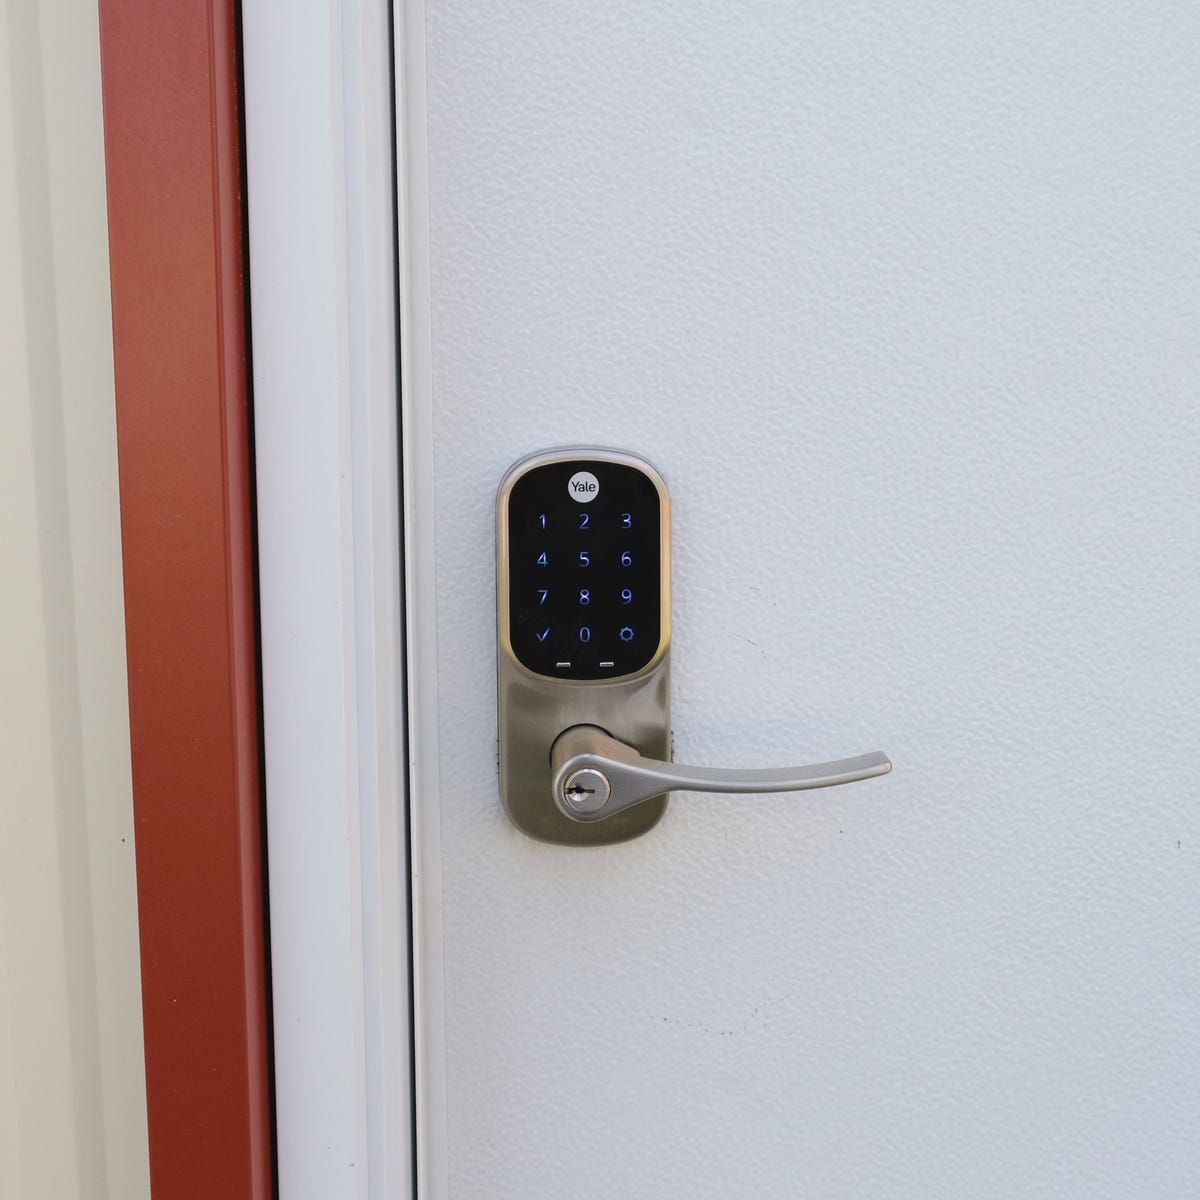 Putting off installing smart locks? Here's why I'm glad I finally did